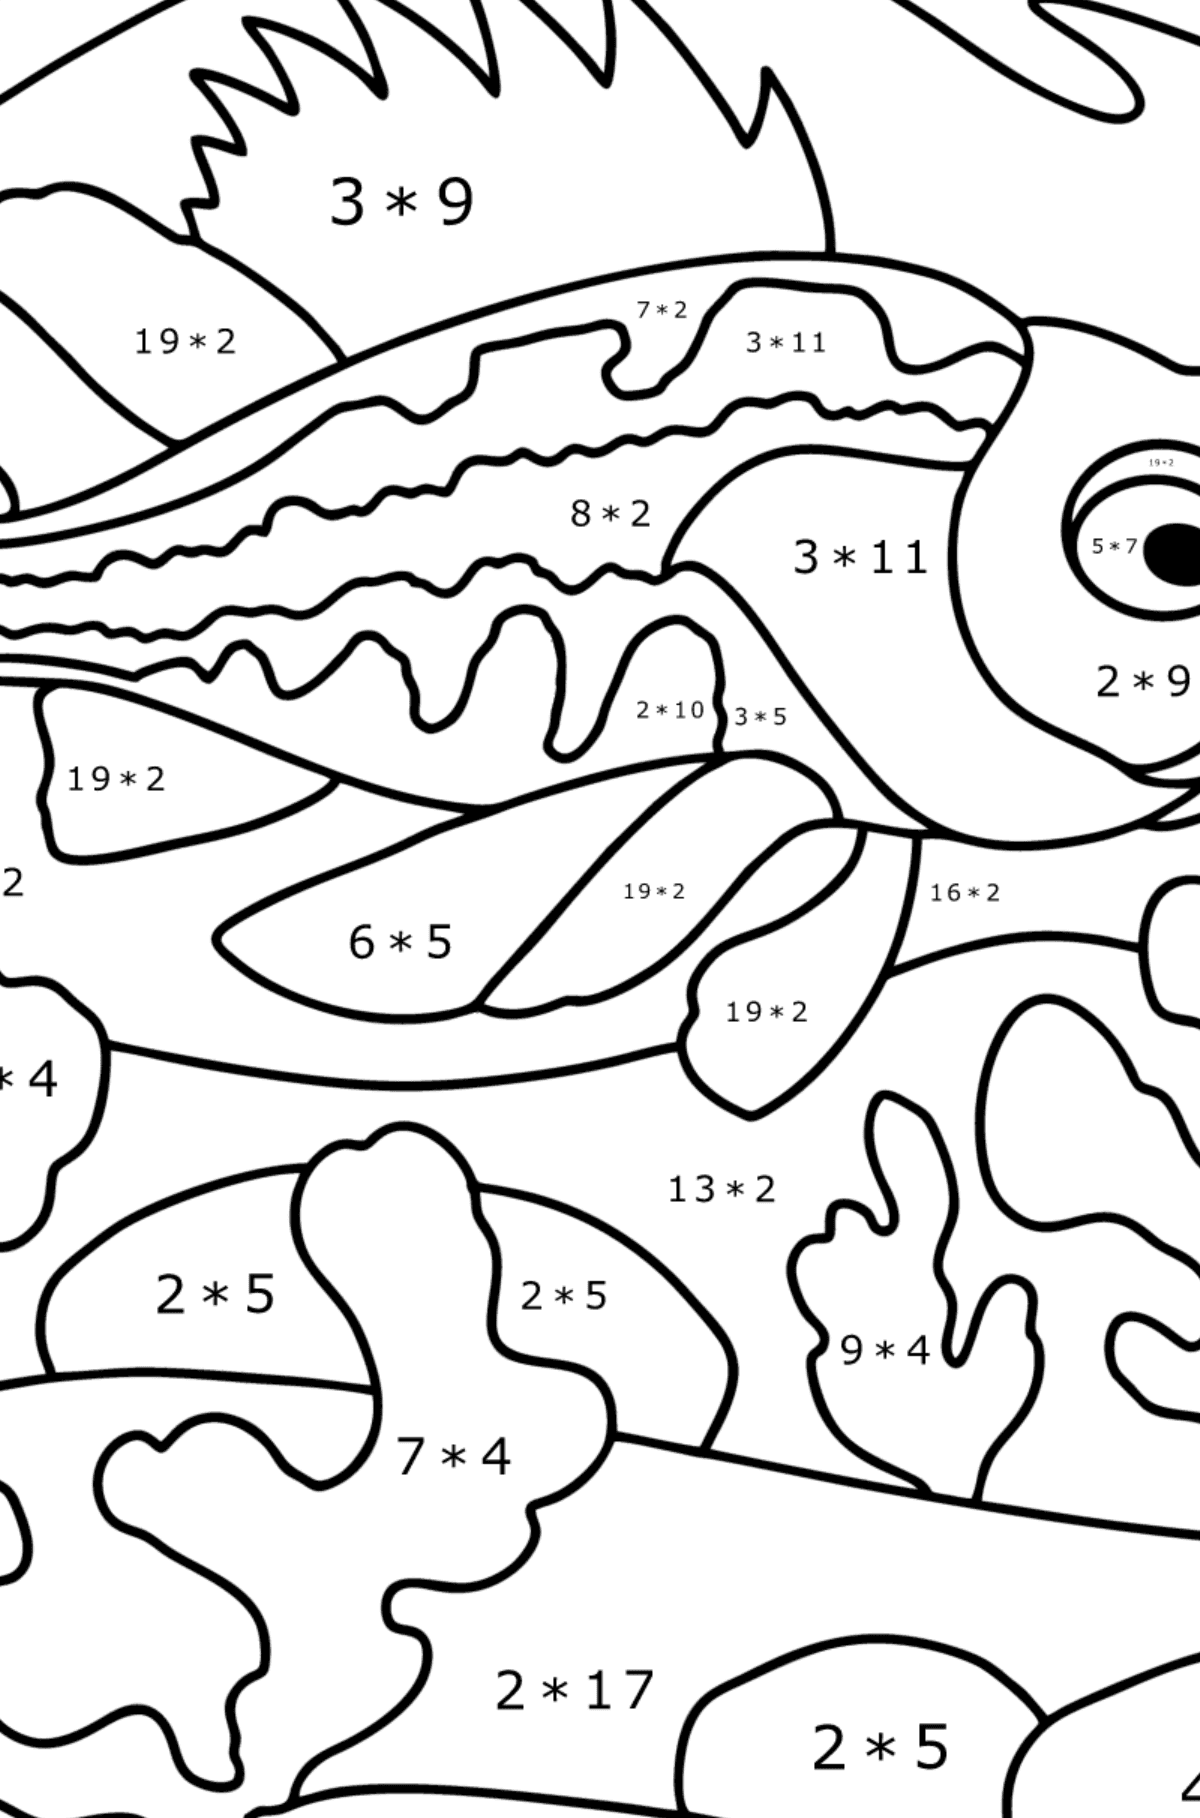 Sea bass coloring page - Math Coloring - Multiplication for Kids